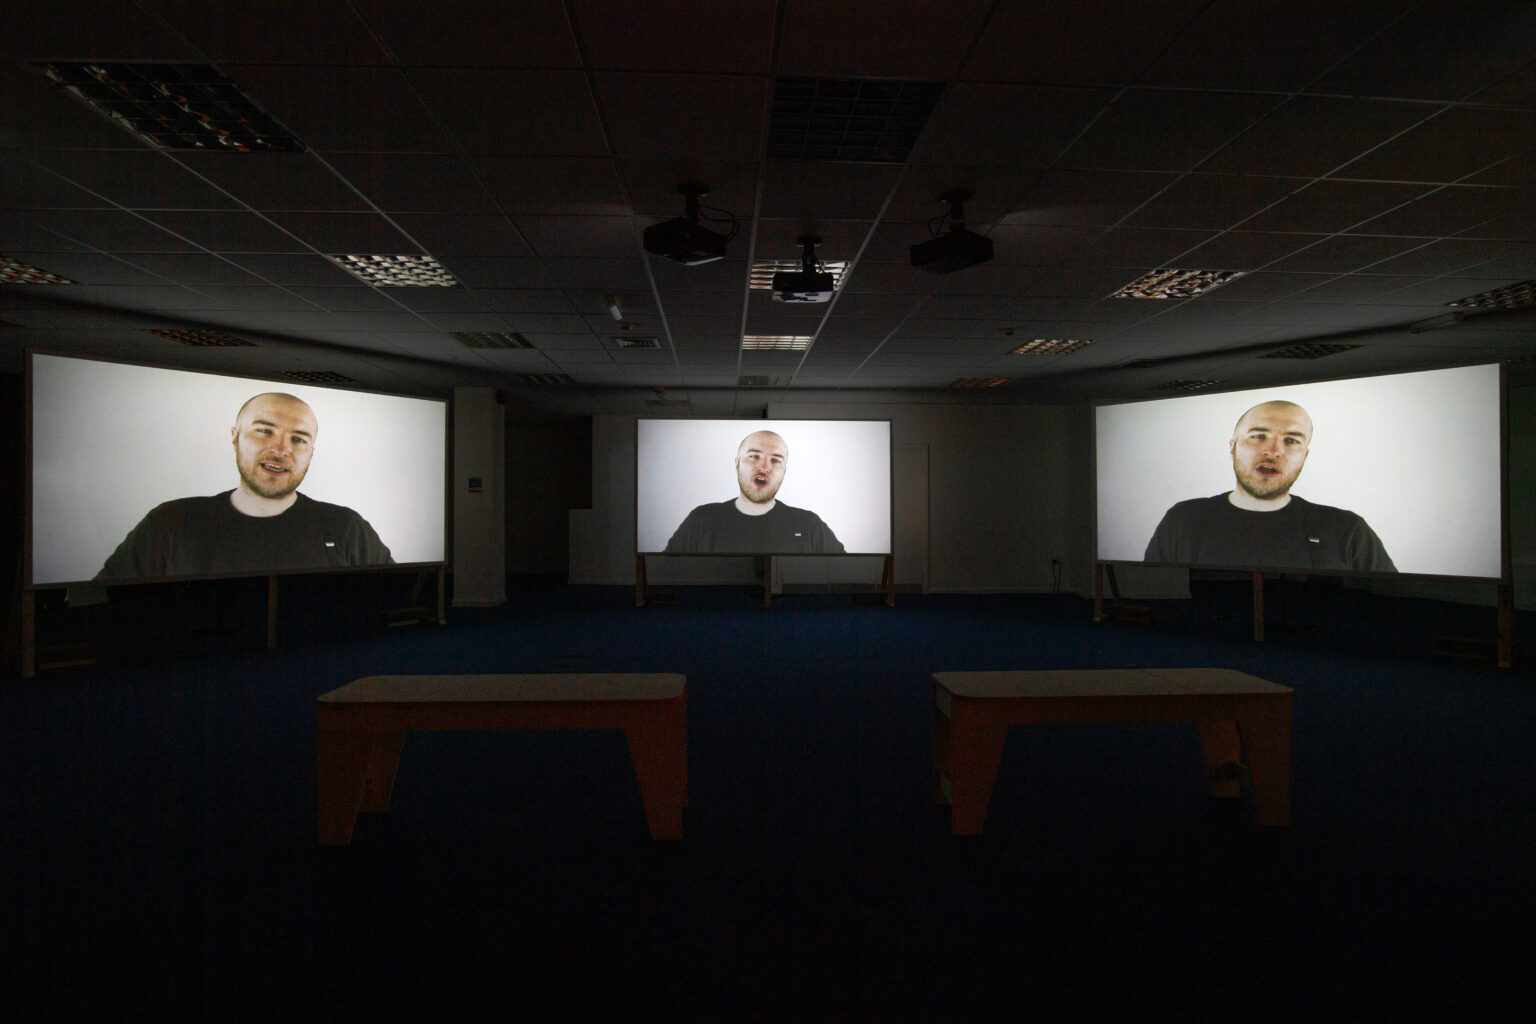 Three large screens in a dimly lit room. One on the far wall, in the middle of the photo, and the other two on adjacent walls either side. All three screens have a slightly similar image. A head and shoulders shot of a while male aged around 30. He has closely cropped hair, stubble and is wearing a black t-shirt. The background behind him is white. His face is different in each image as if he were talking or singing. There are two benches in the room in front of the screens.